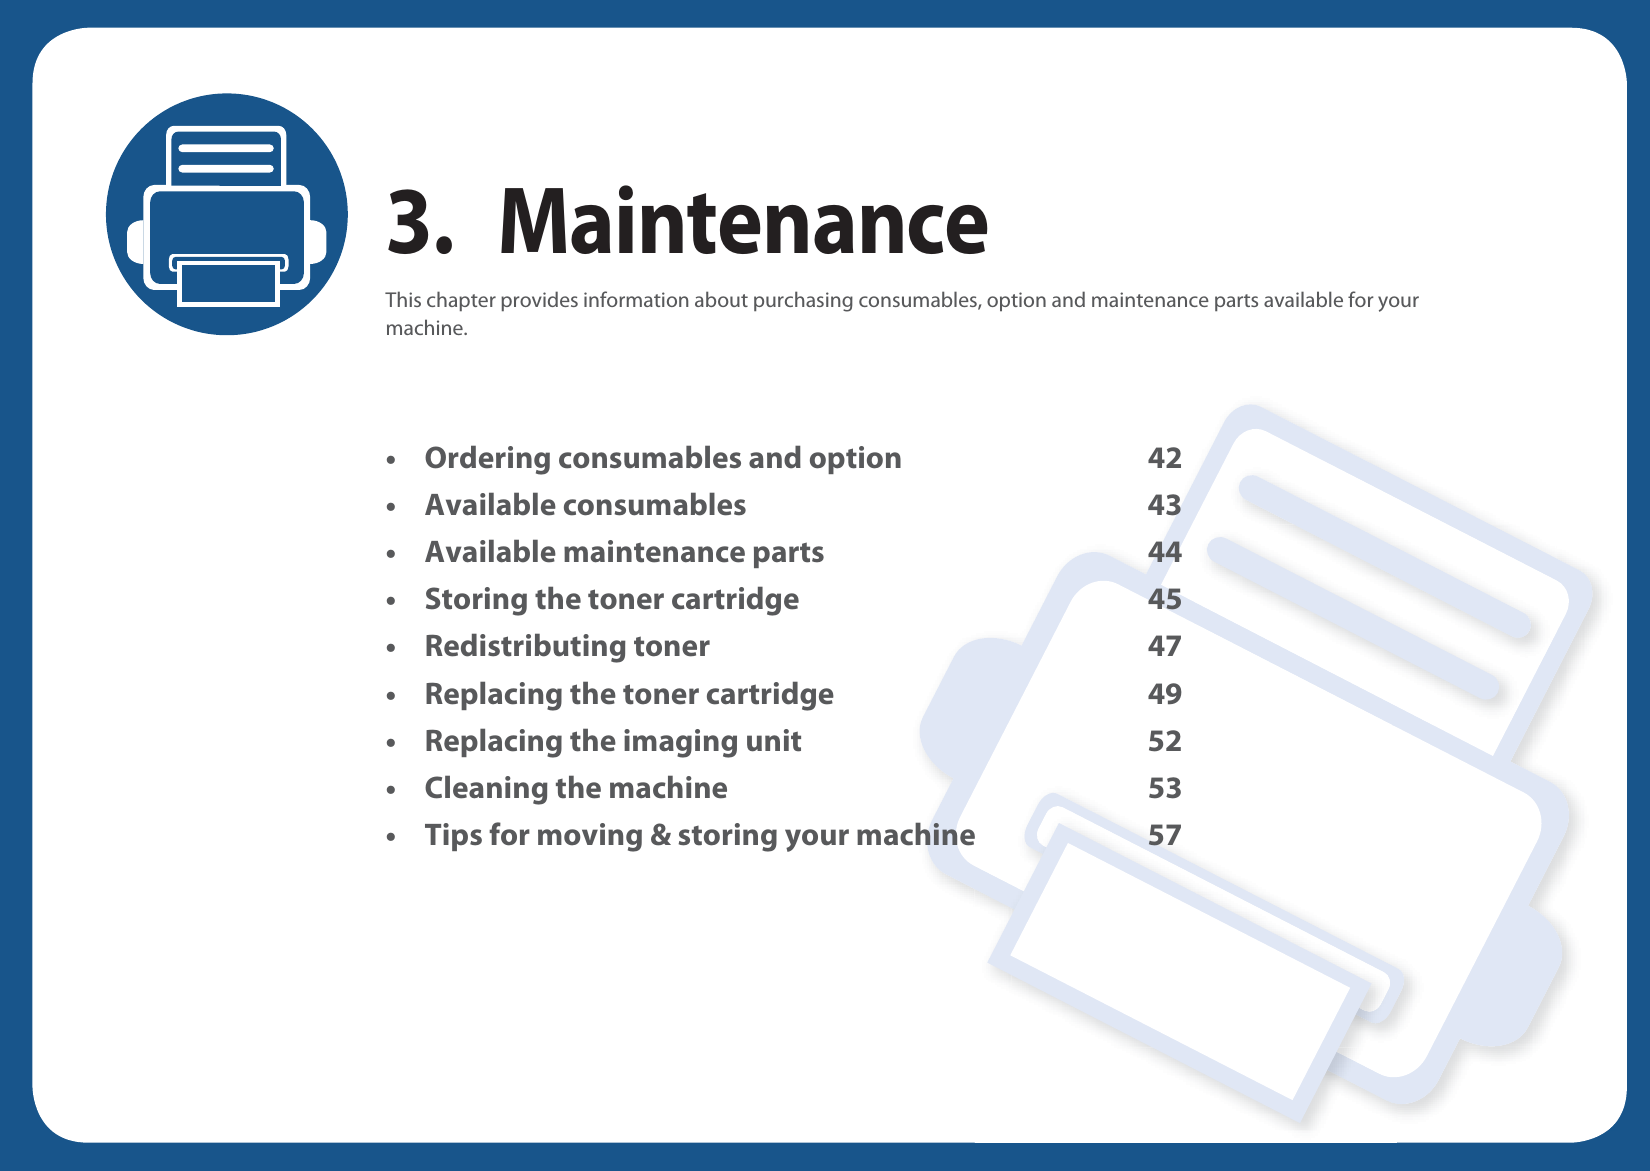 3. MaintenanceThis chapter provides information about purchasing consumables, option and maintenance parts available for your machine.• Ordering consumables and option 42• Available consumables 43• Available maintenance parts 44• Storing the toner cartridge 45• Redistributing toner 47• Replacing the toner cartridge 49• Replacing the imaging unit 52• Cleaning the machine 53• Tips for moving &amp; storing your machine 57